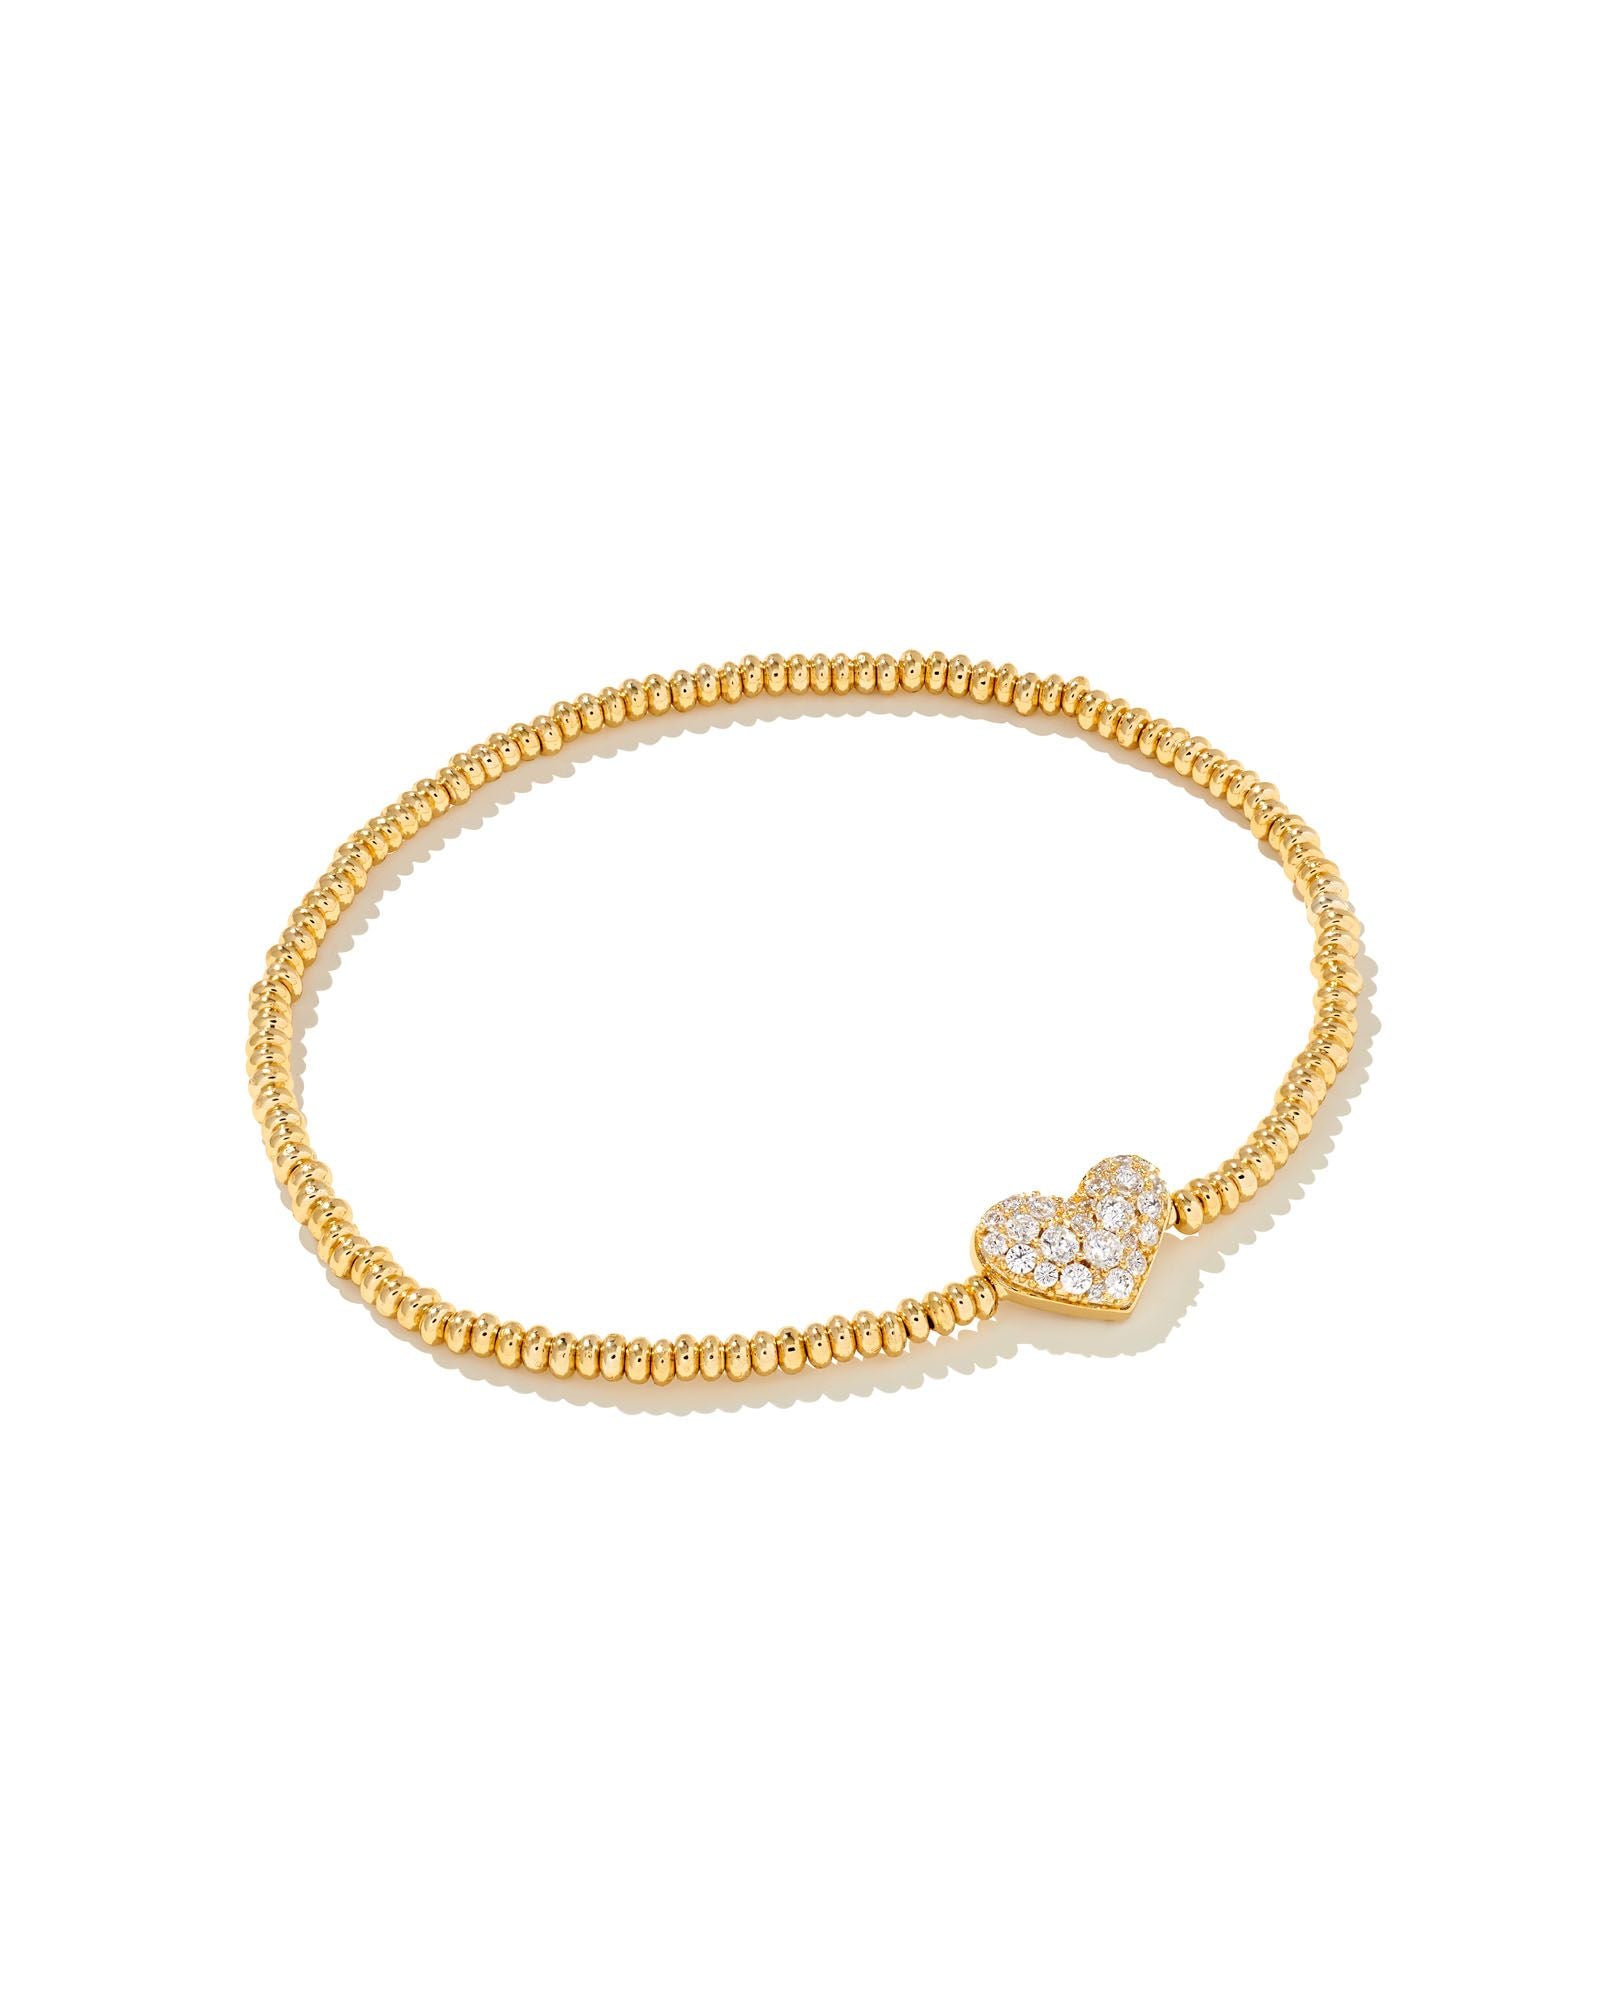 Ari Pave Crystal Heart Stretch Bracelet in Gold White Crystal